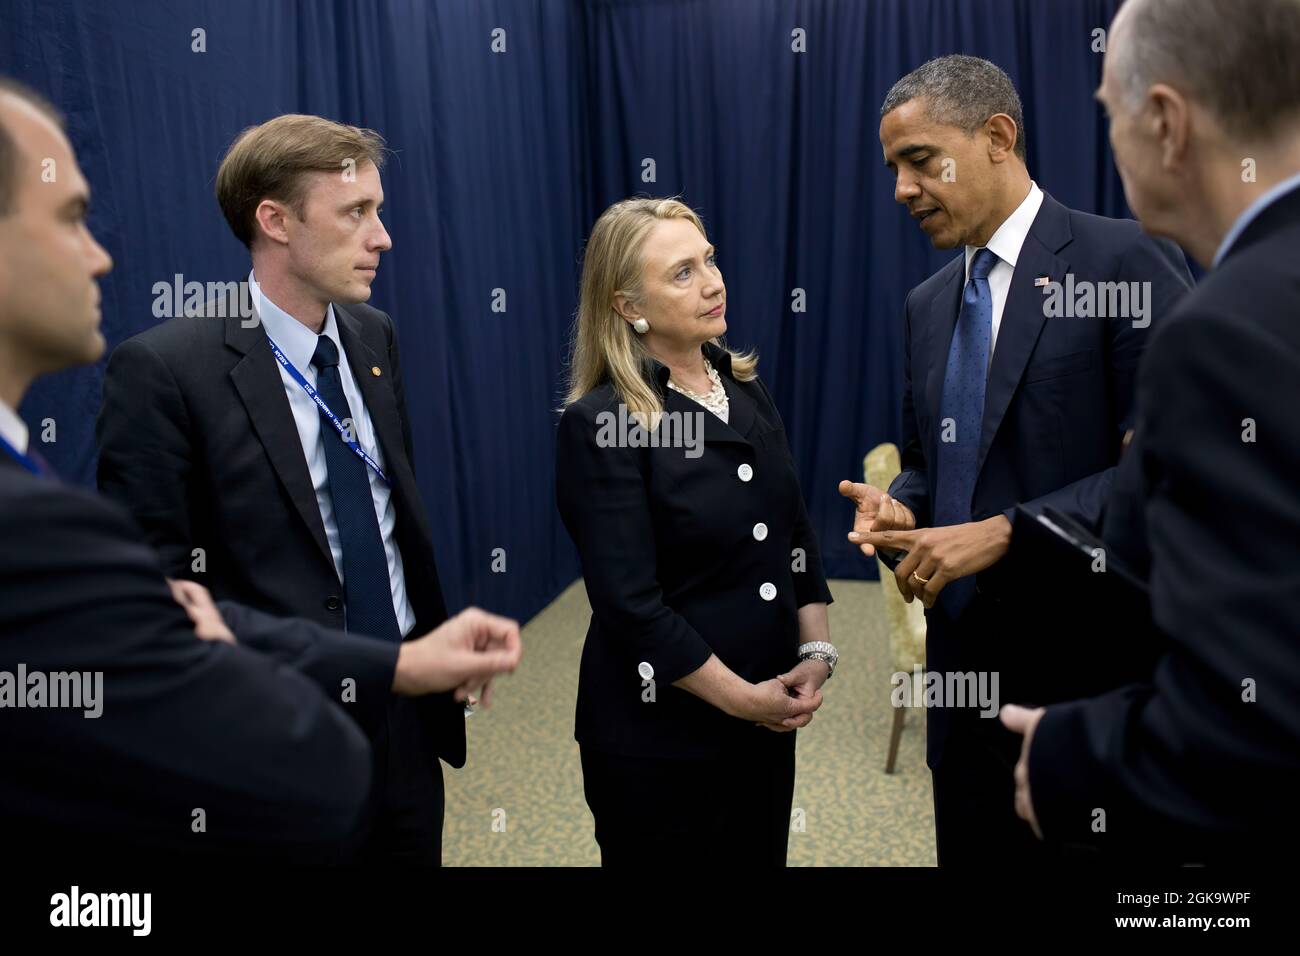 President Barack Obama talks with Secretary of State Hillary Rodham Clinton about his decision to send her to the Middle East while attending the U.S.-ASEAN Summit in Phnom Penh, Cambodia, Nov. 20, 2012. From left are: Ben Rhodes, Deputy National Security Advisor for Strategic Communications; Jake Sullivan, Deputy Chief of Staff to the Secretary of State; and National Security Advisor Tom Donilon. (Official White House Photo by Pete Souza) This official White House photograph is being made available only for publication by news organizations and/or for personal use printing by the subject(s) o Stock Photo